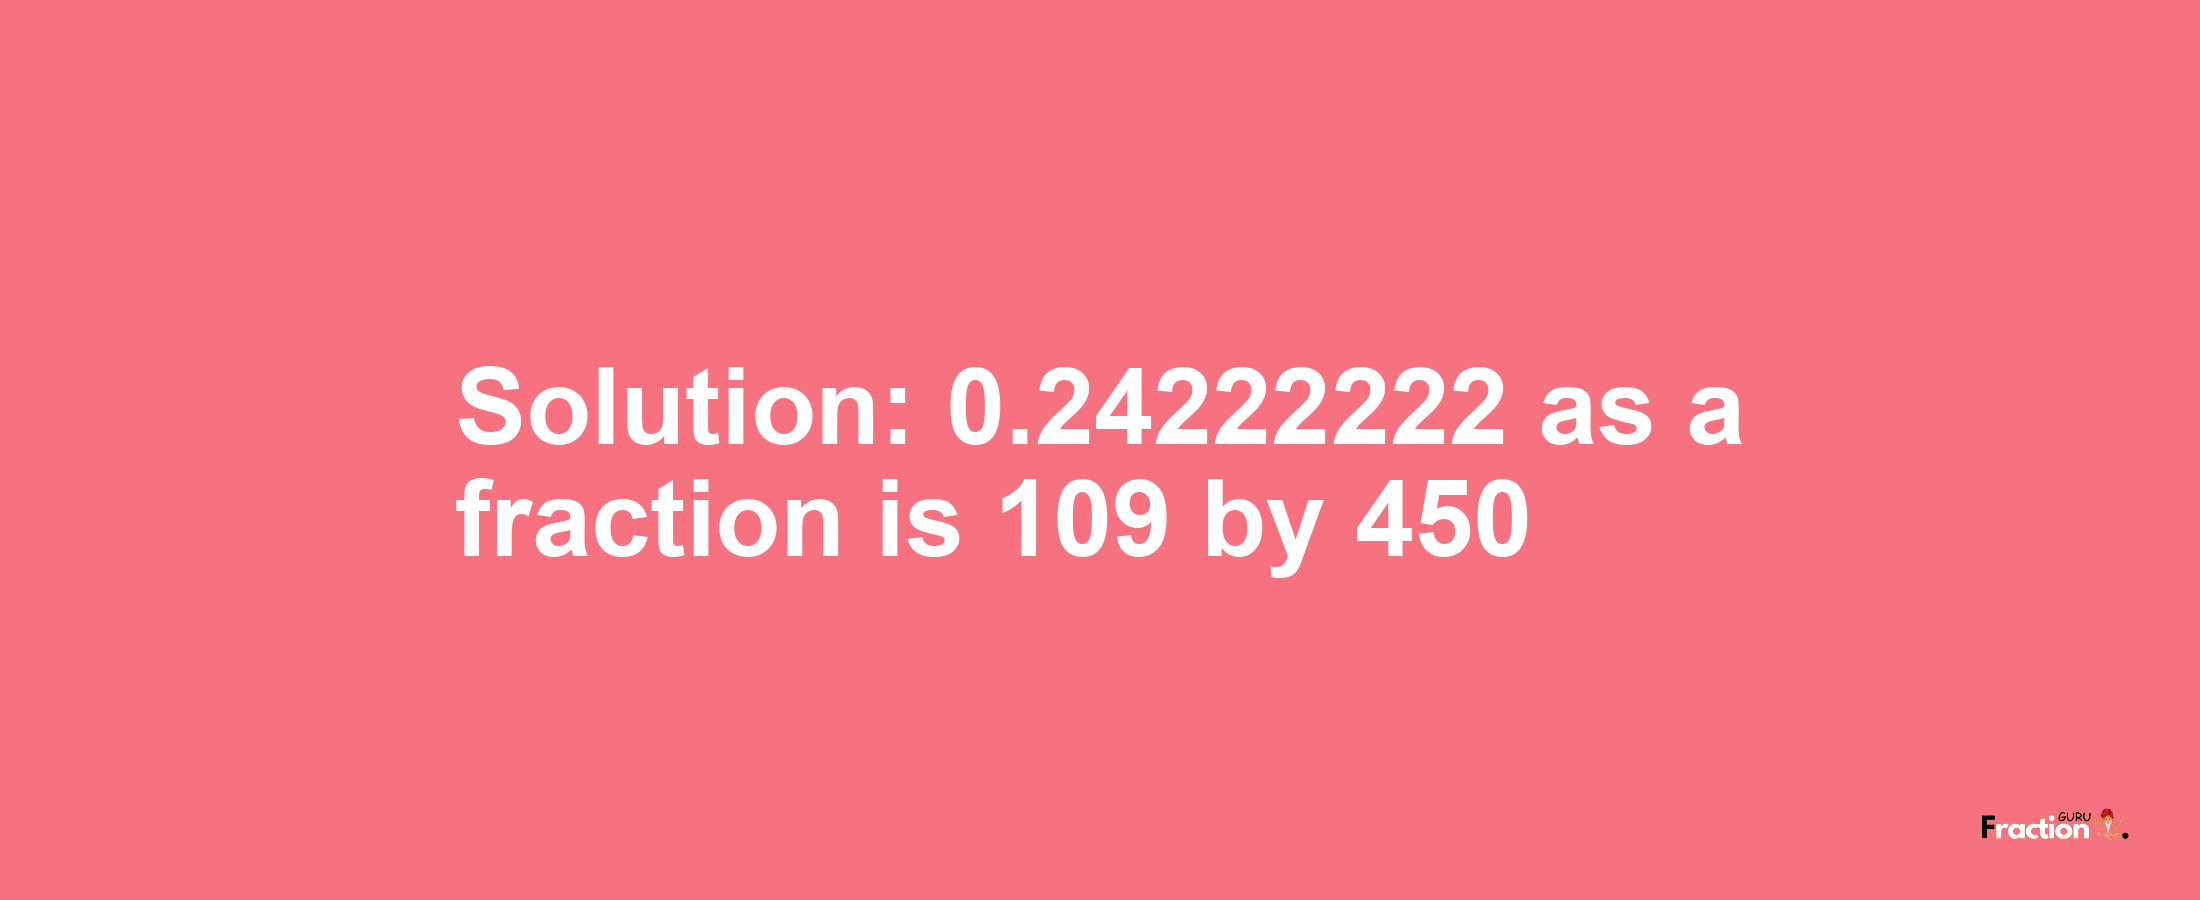 Solution:0.24222222 as a fraction is 109/450